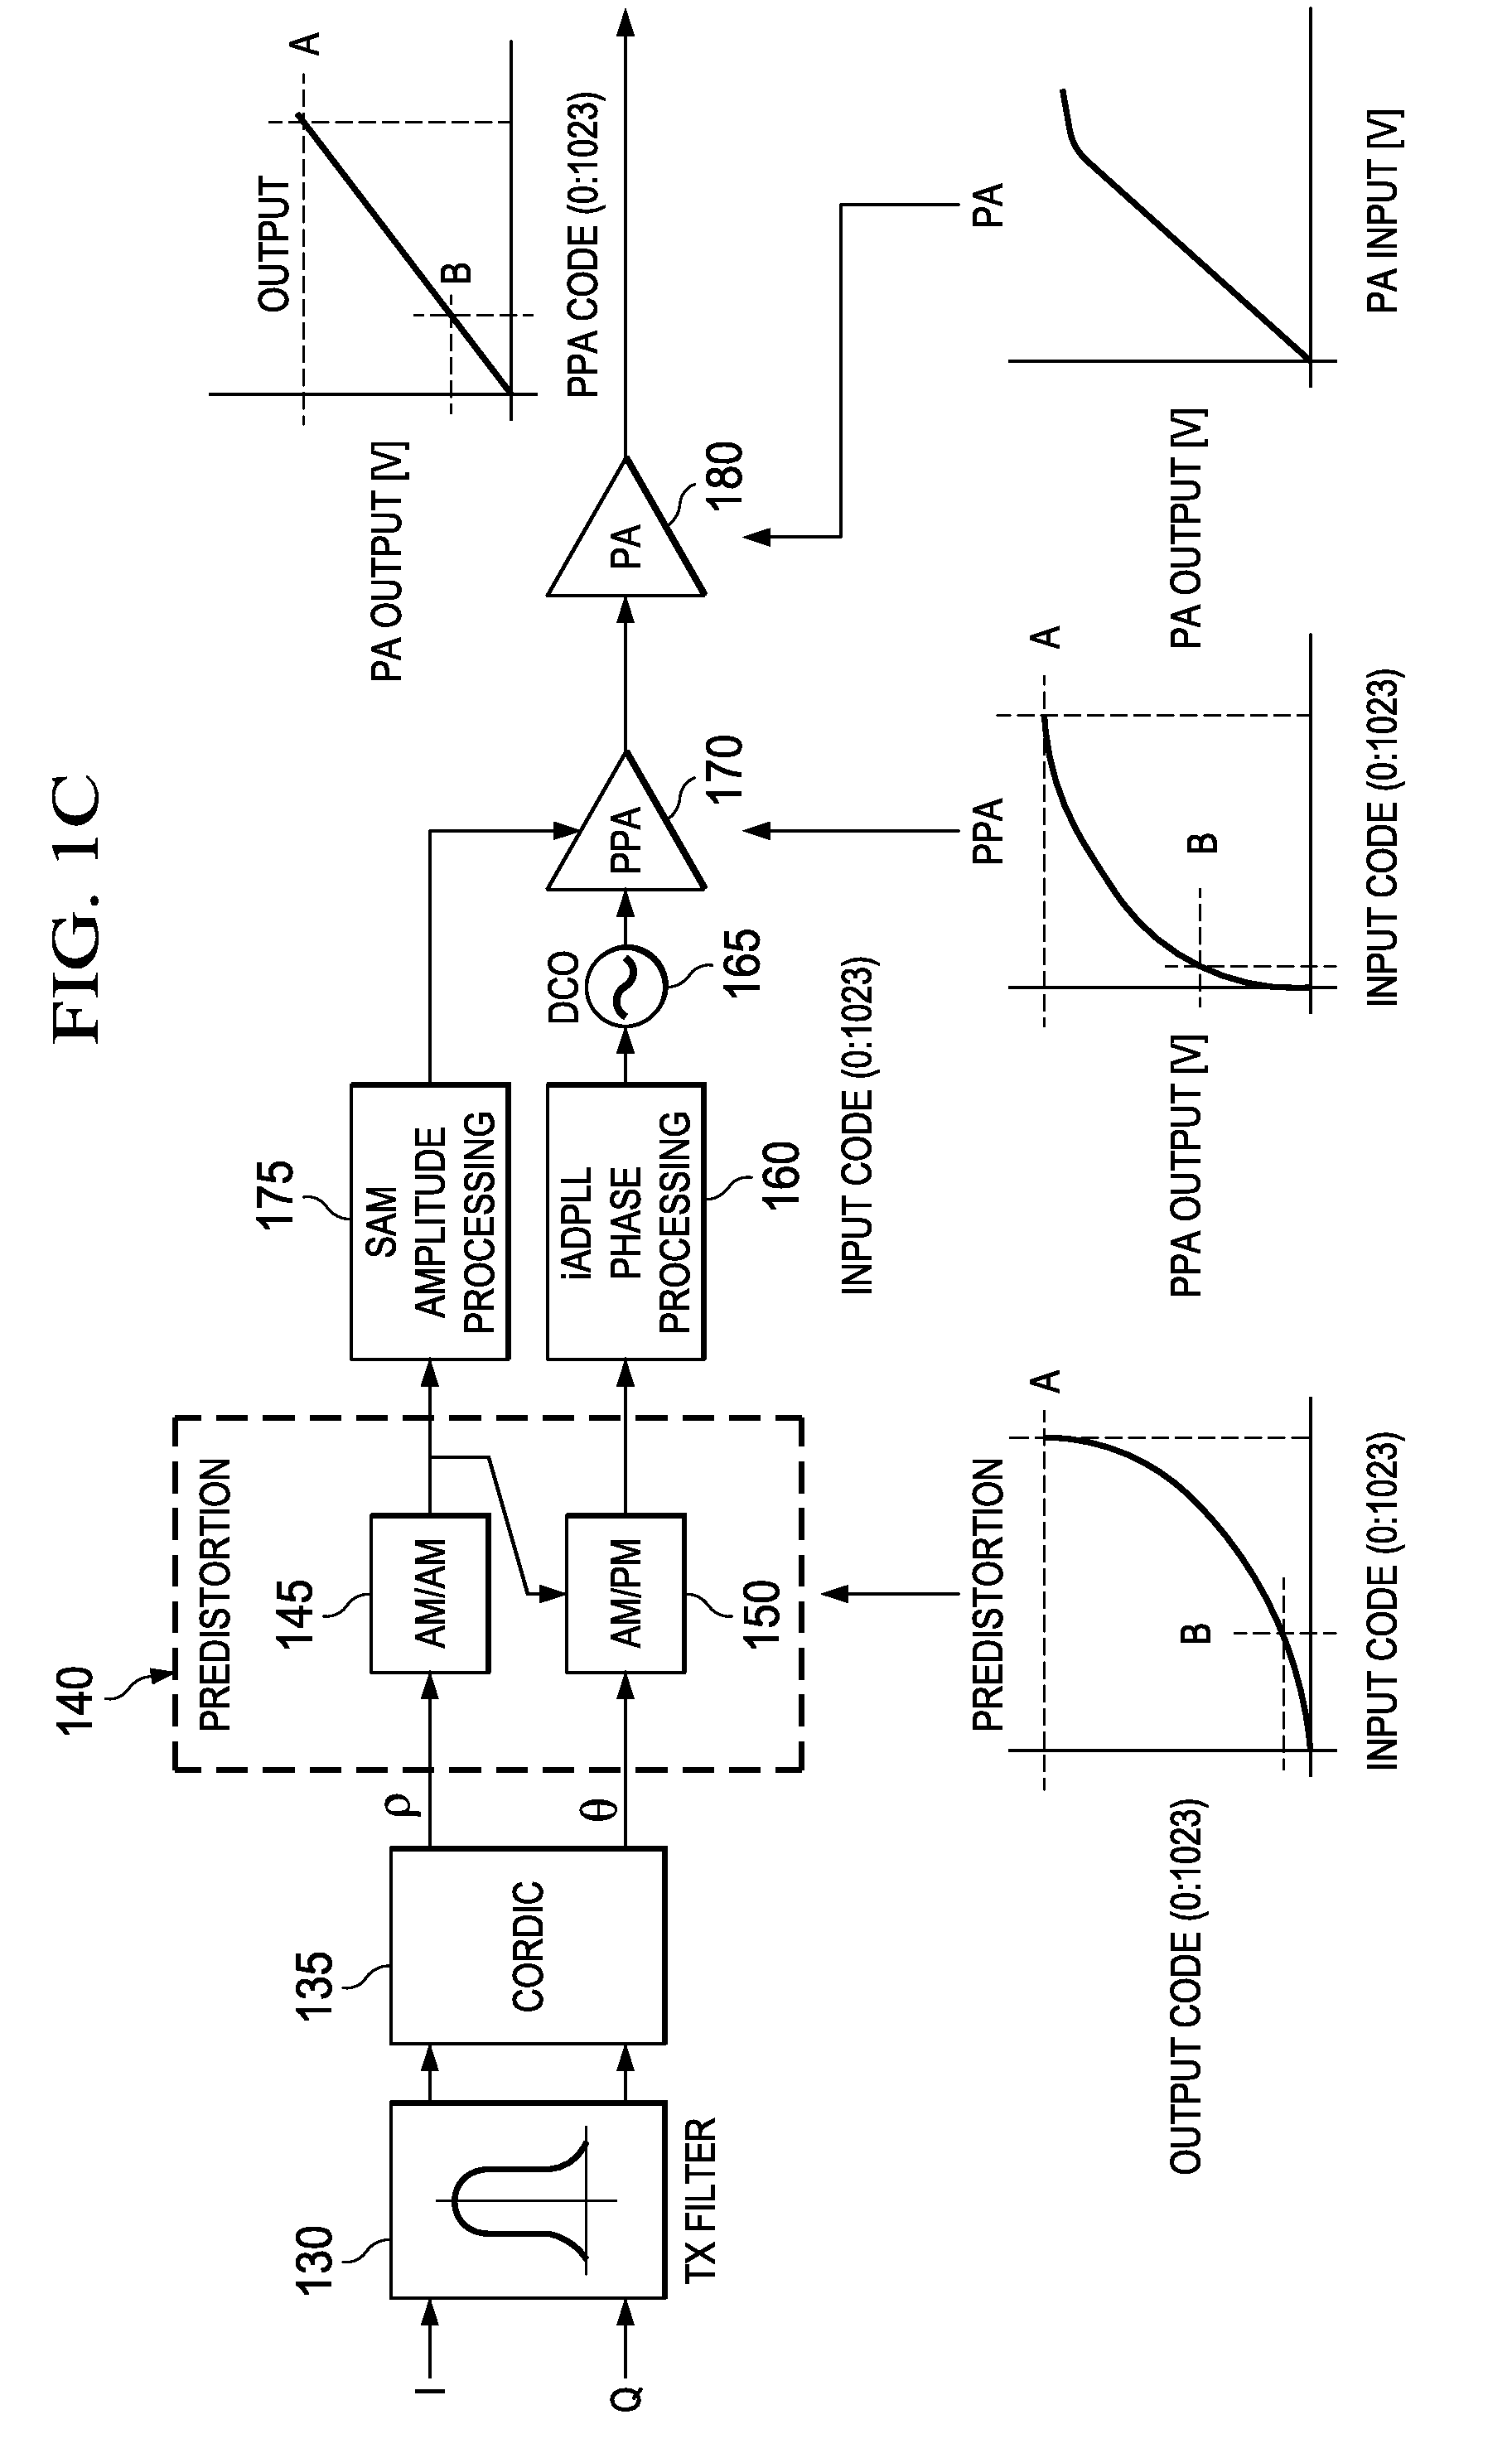 Apparatus and Method for Adaptive Polar Transmitter Linearization and Wireless Transmitter Employing the Same